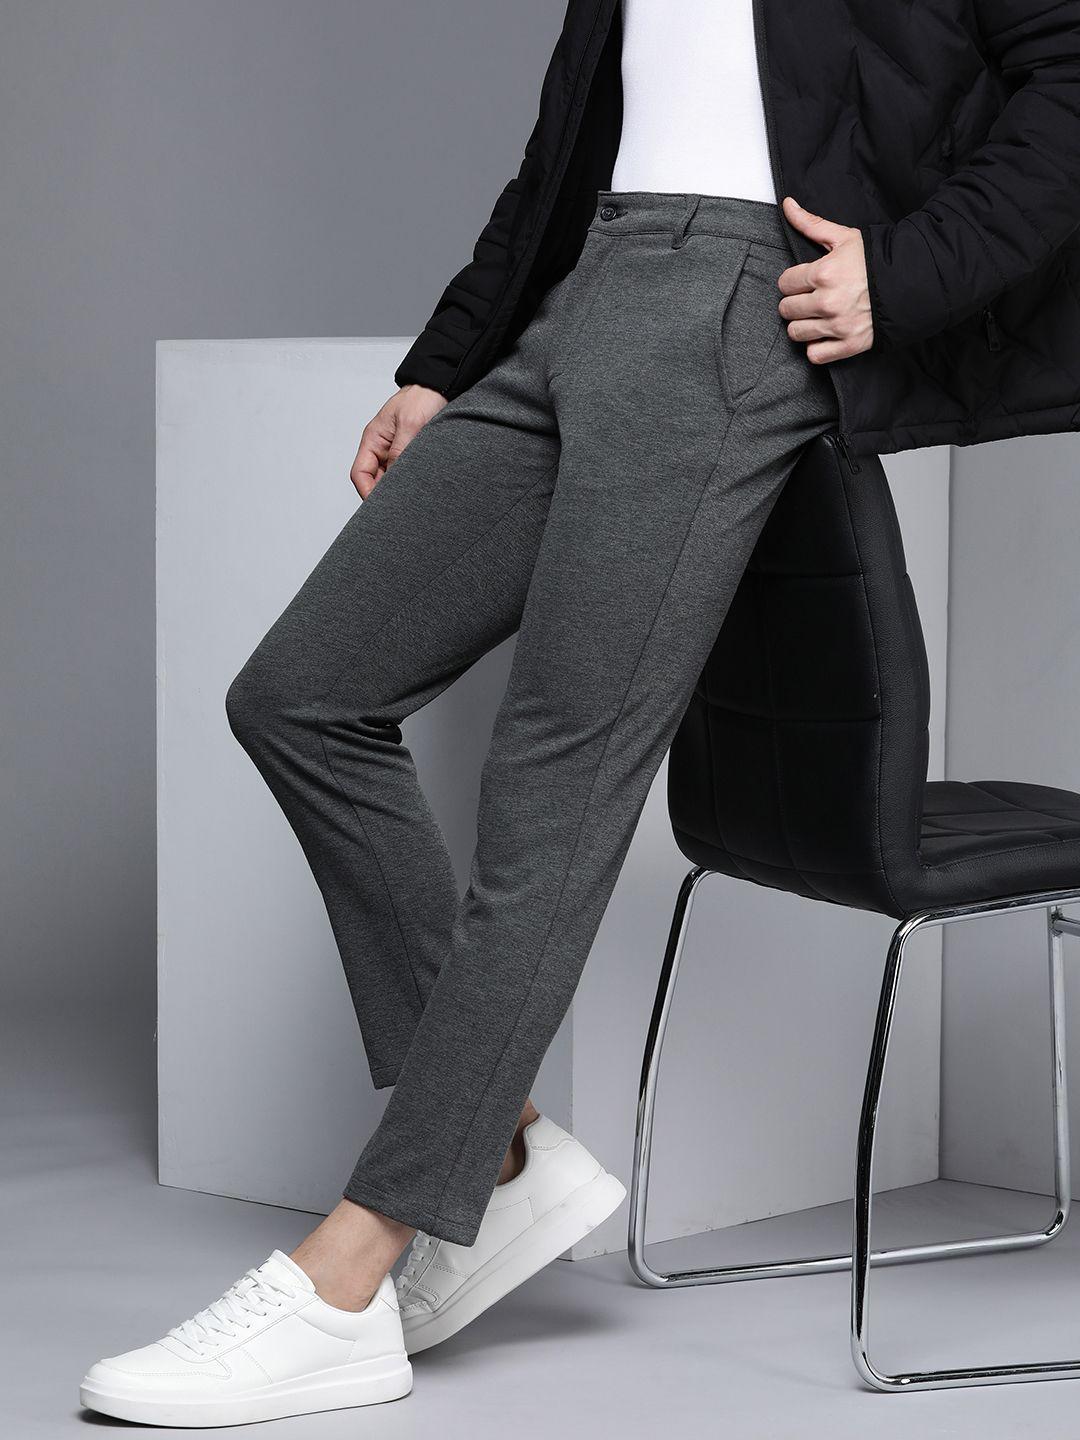 kenneth-cole-dash-men-grey-solid-slim-fit-trousers